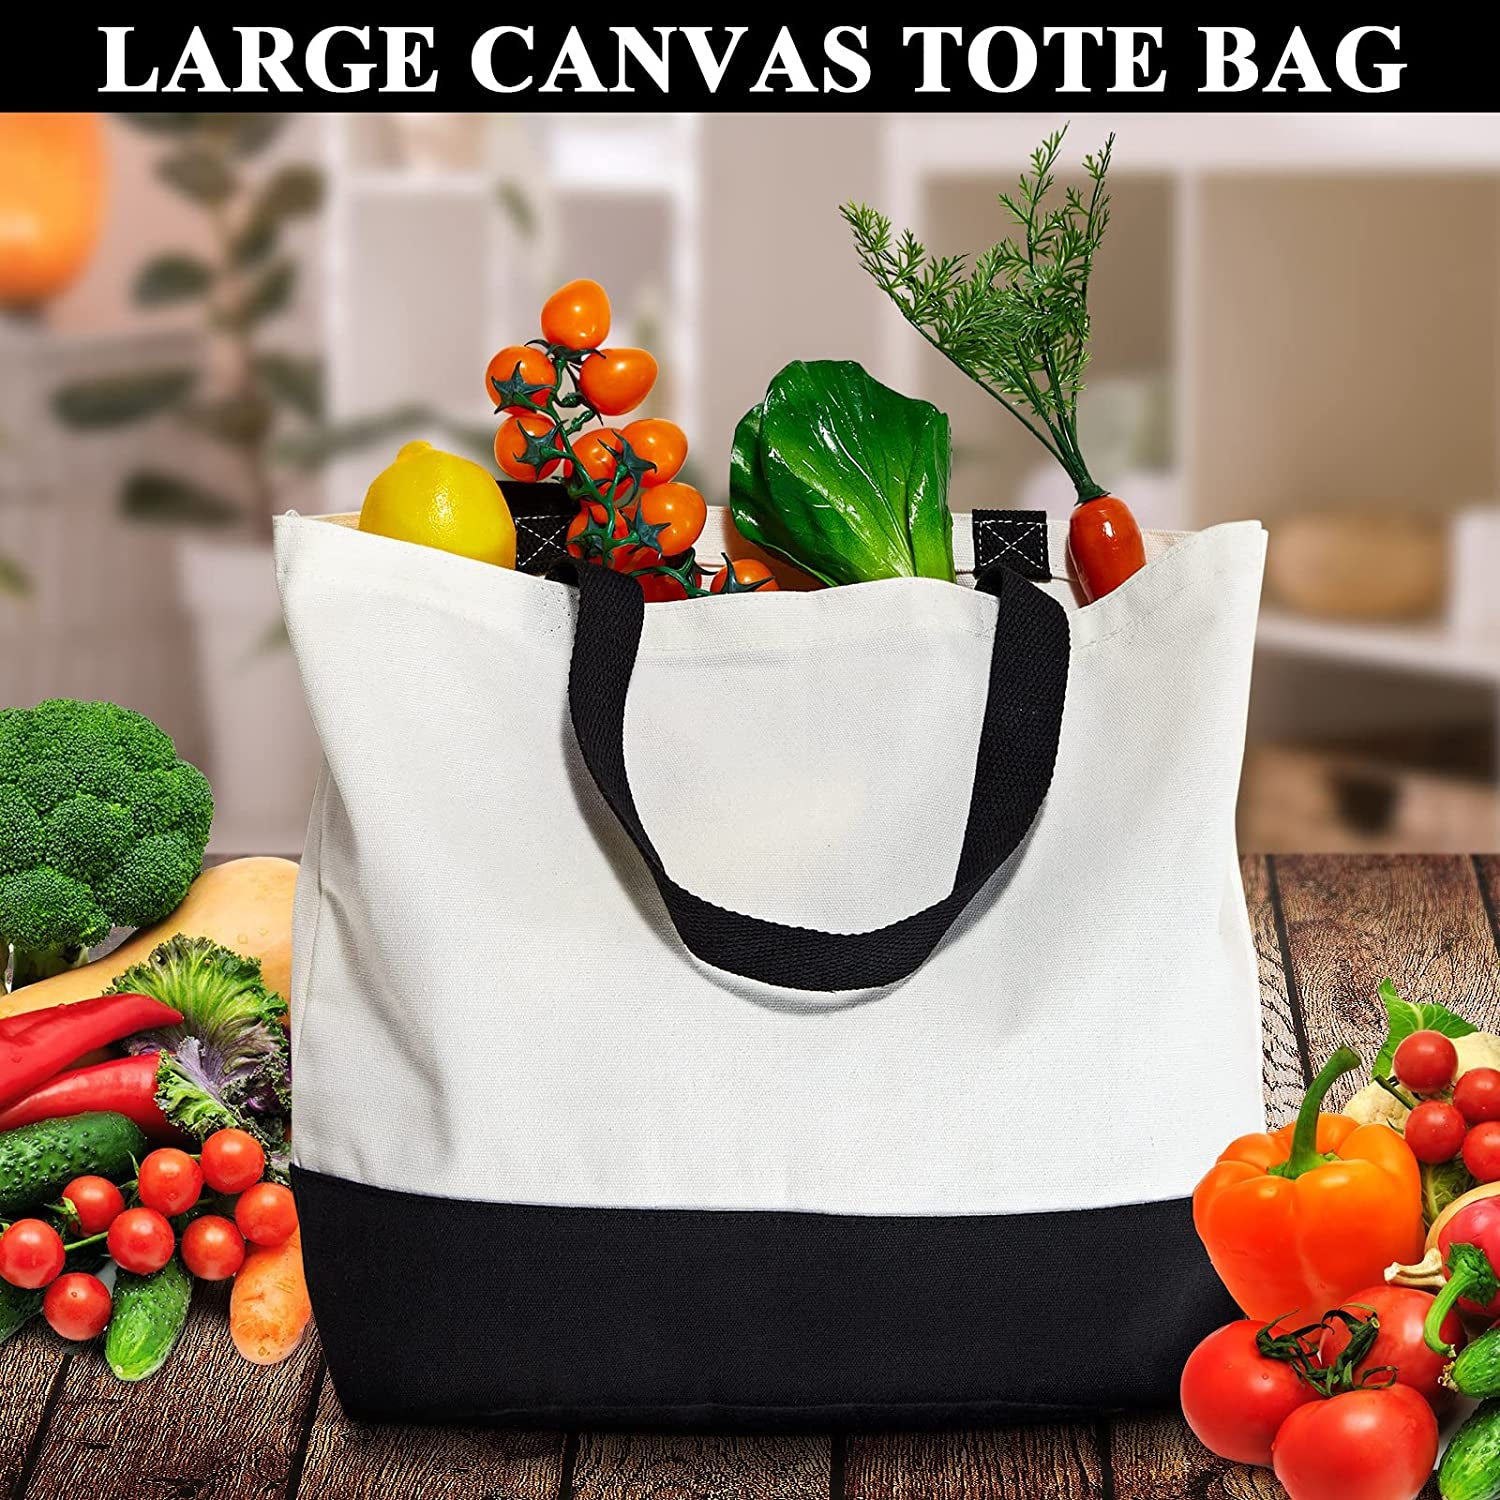 20 Pack Large Canvas Tote Bags, Reusable Blank Tote Bulk Washable Grocery Bags with Handles DIY Shopping Cloth Bags for Beach Travel Work School, 18.5 X 15 X 4.8 Inches